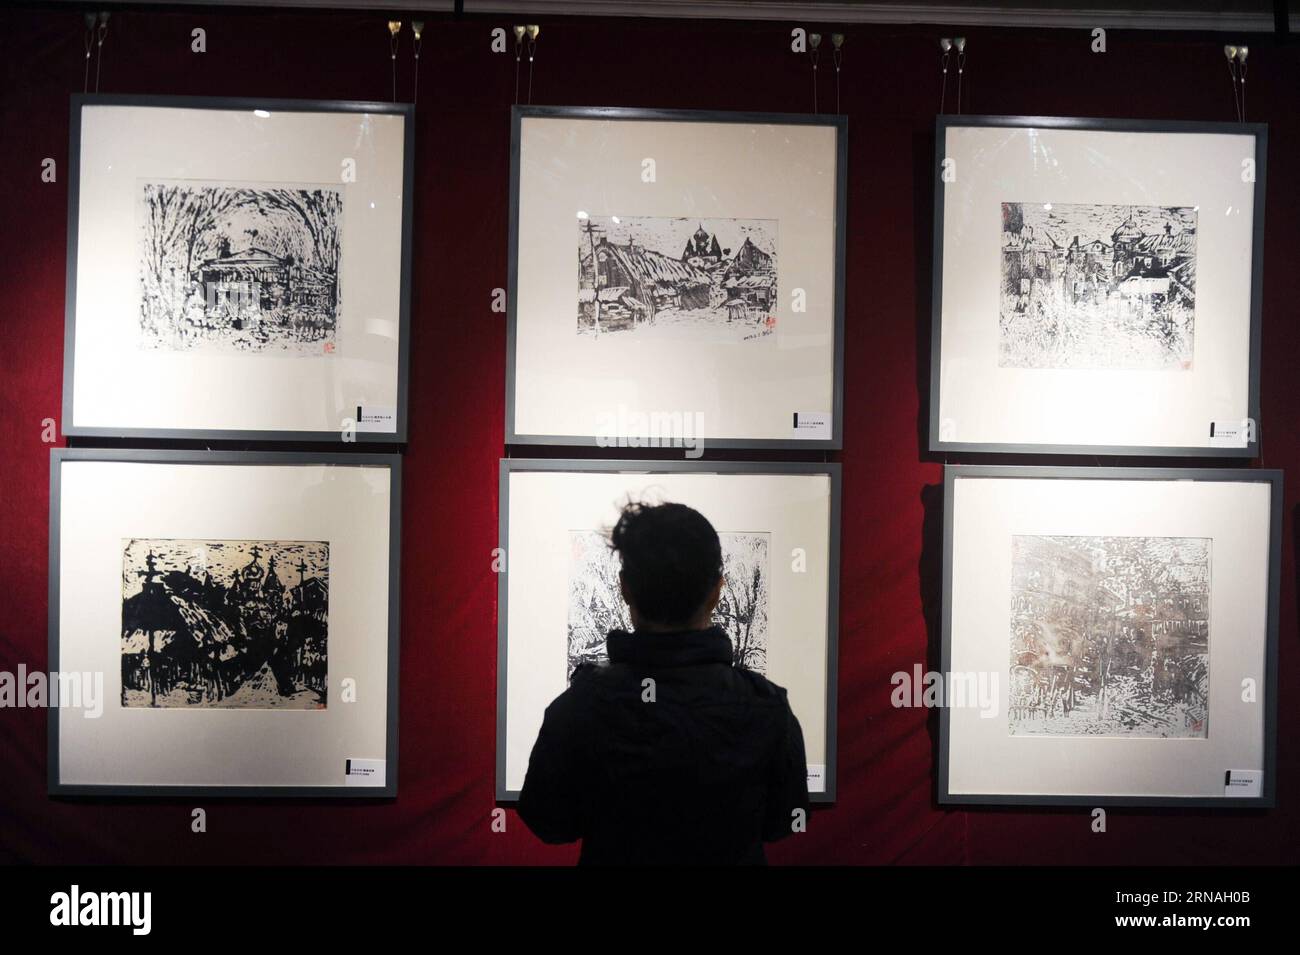 (160126) -- HARBIN, Jan. 26, 2016 -- A visitor views an exhibition of ice engraving painting in Harbin, capital of northeast China s Heilongjiang Province, Jan. 26, 2016. The pictures on display were printed from engraved ice slabs, according to artist Zhu Xiaodong. He said each ice slab was able to print out some 20 pages yielding variant results as the ice melted down. ) (twy) CHINA-HARBIN-ICE-ENGRAVING PAINTING (CN) WangxSong PUBLICATIONxNOTxINxCHN   160126 Harbin Jan 26 2016 a Visitor Views to Exhibition of ICE Engraving Painting in Harbin Capital of Northeast China S Heilongjiang Province Stock Photo